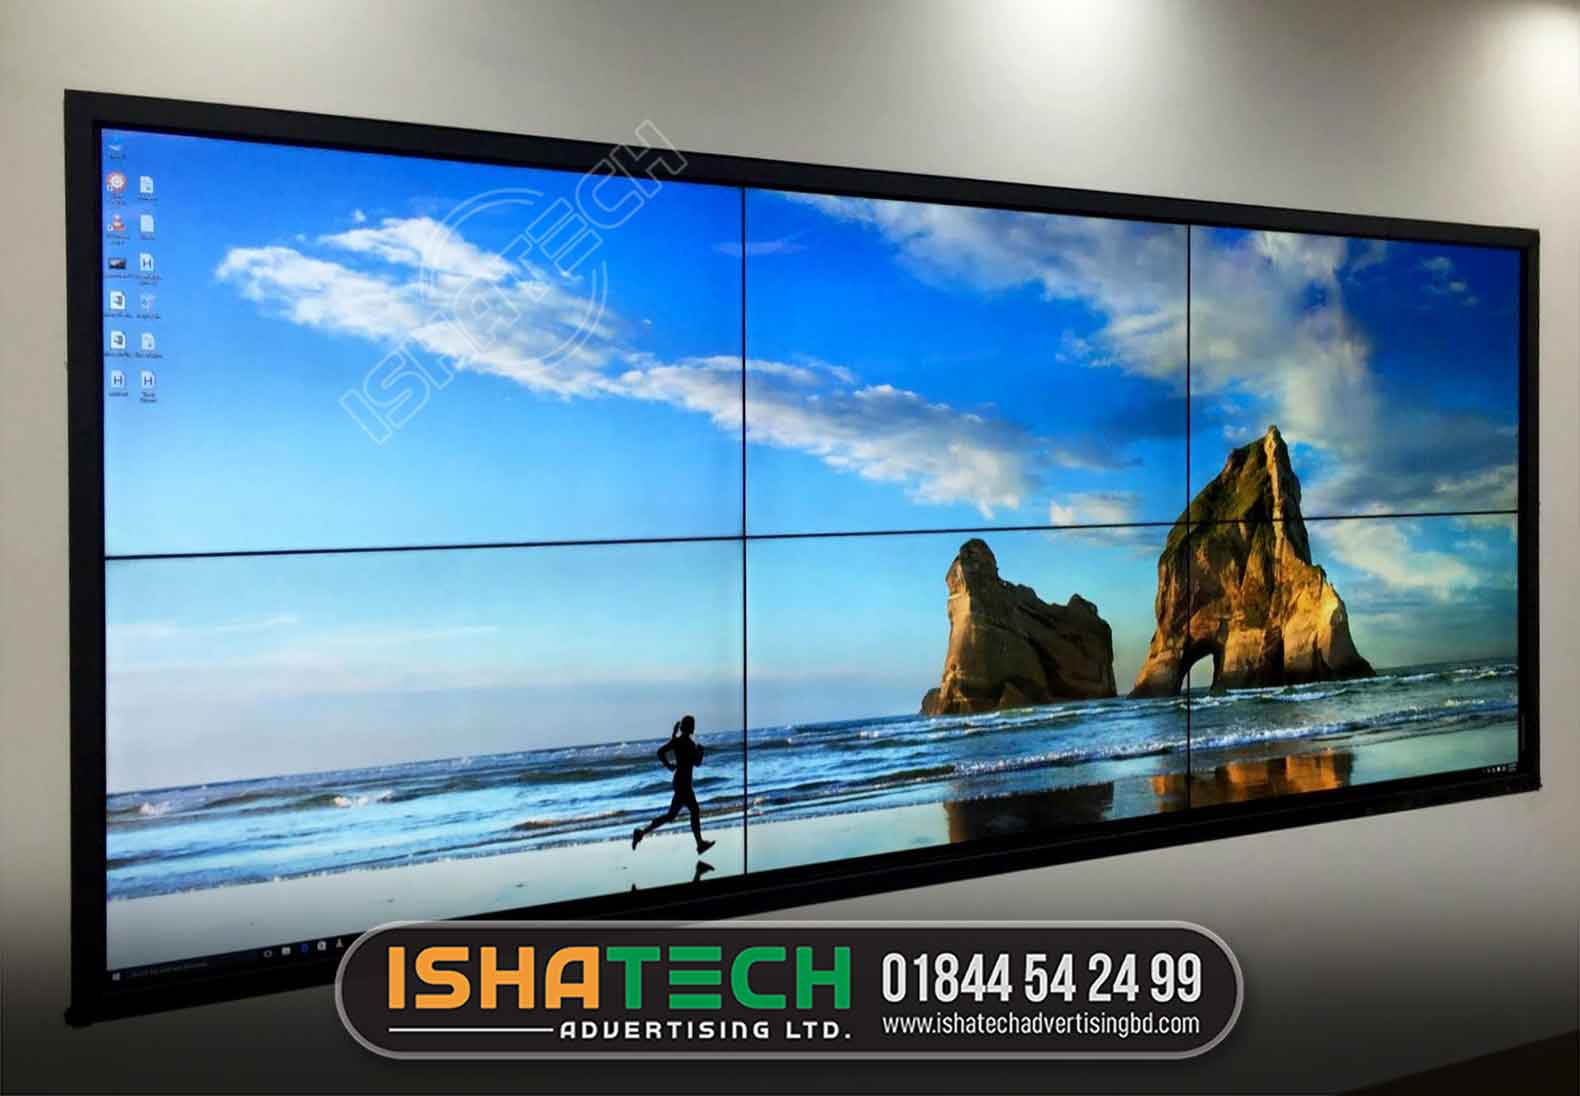 P1.86 led panel indoor SMD rental led panel 480x480mm. Advertising, Shopping Guide, School, Exhibition, station, hospital, building wall ect any place which needs advertising price in Bangladesh